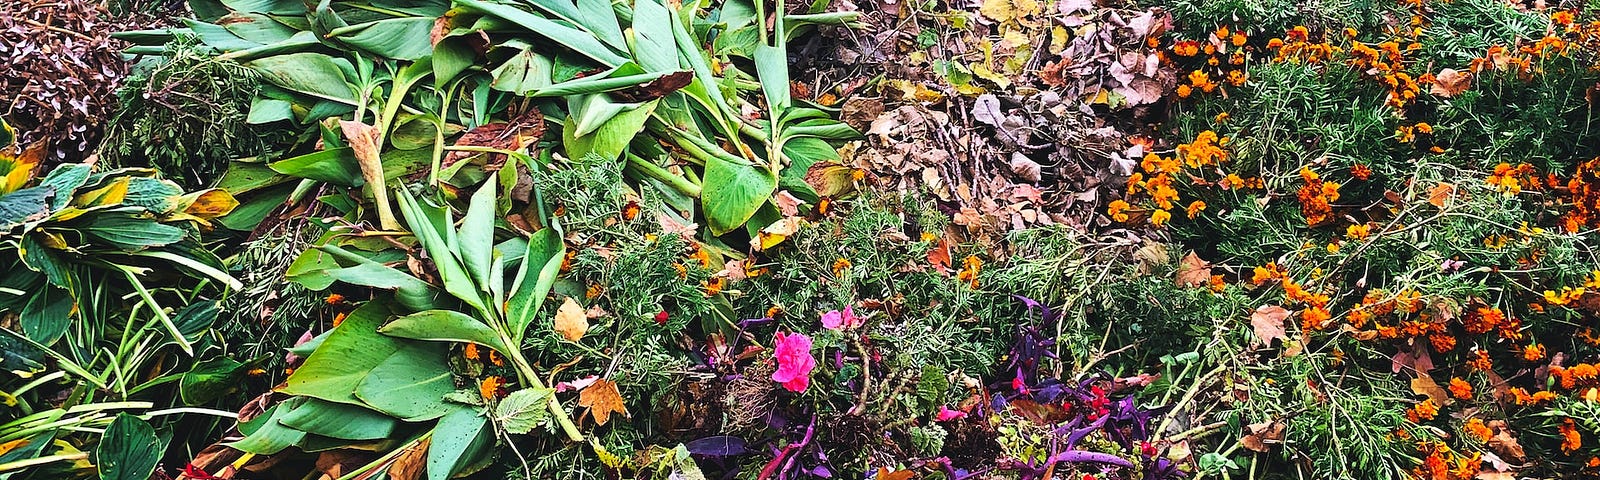 A pile of colorful plants lying on the ground